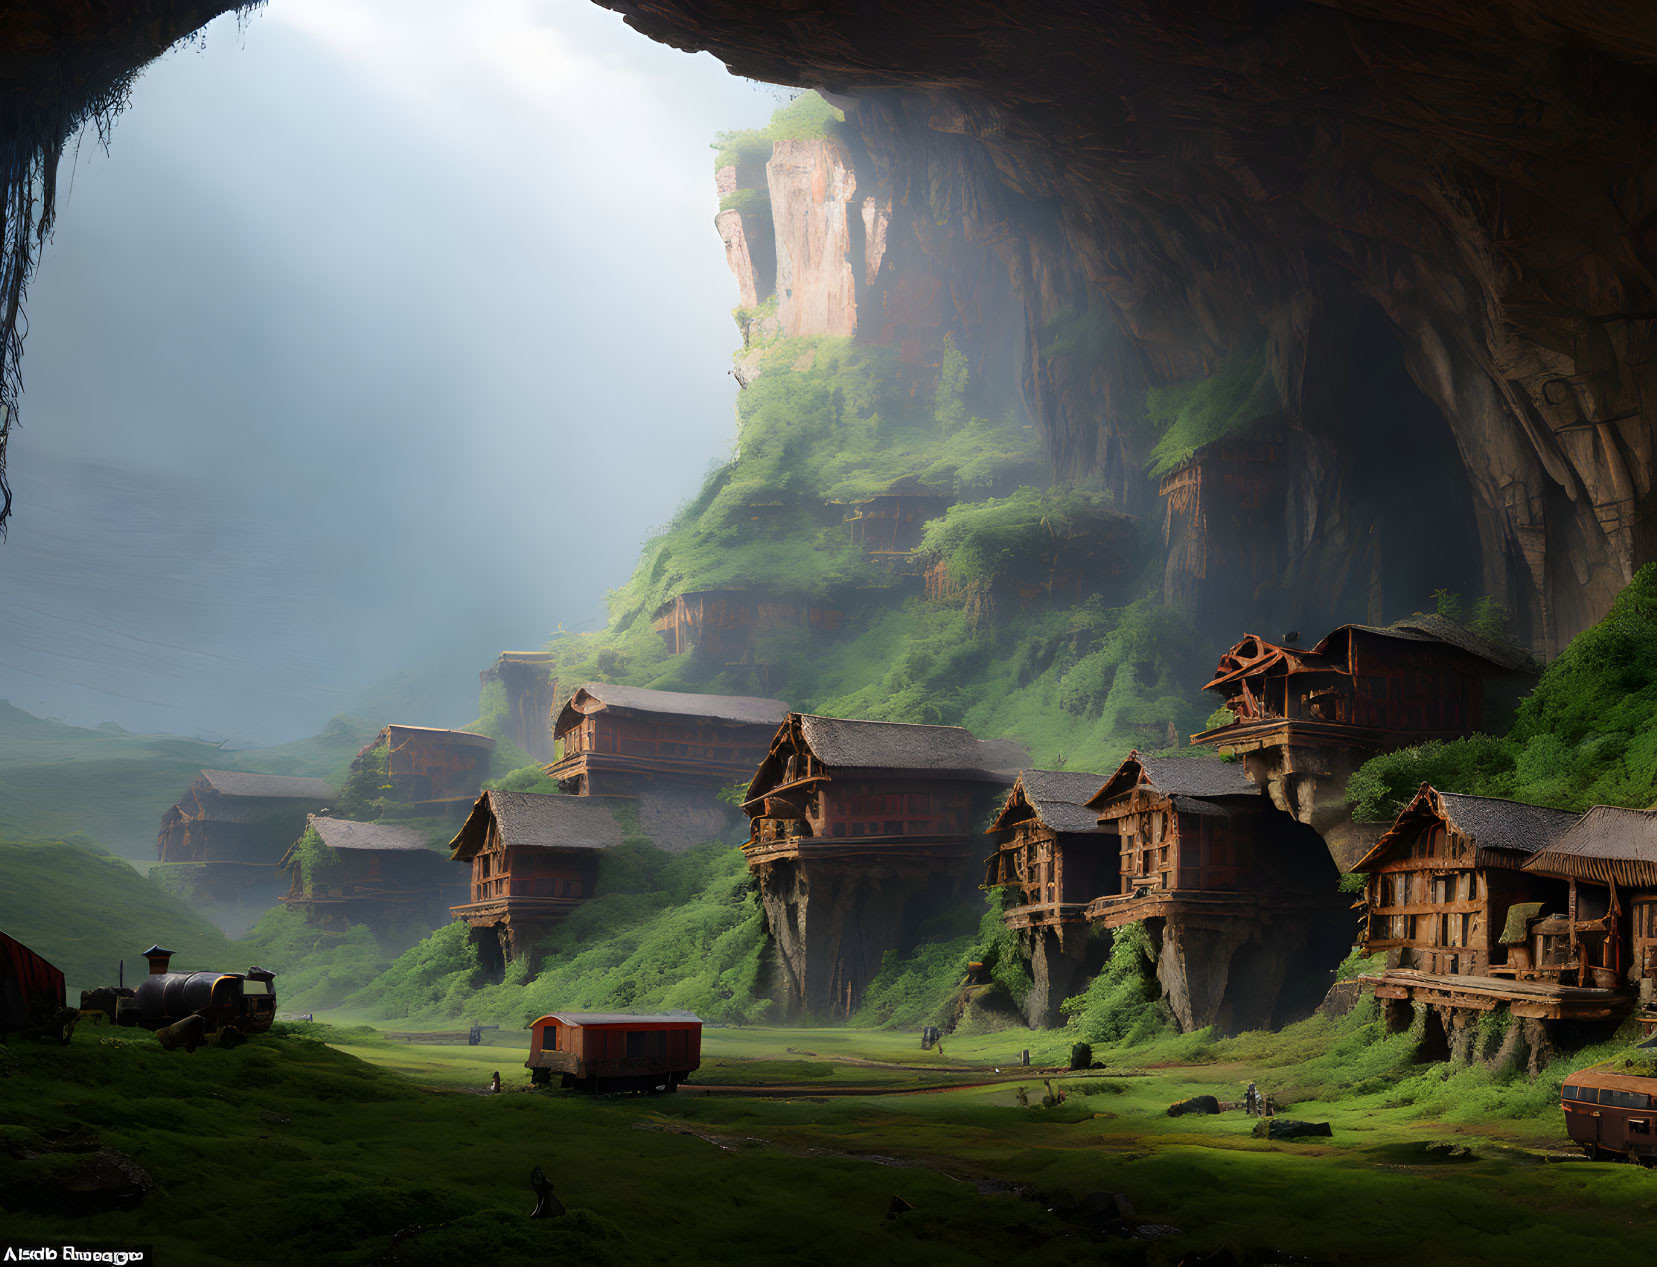 Mystical cave village with wooden houses and train in misty light